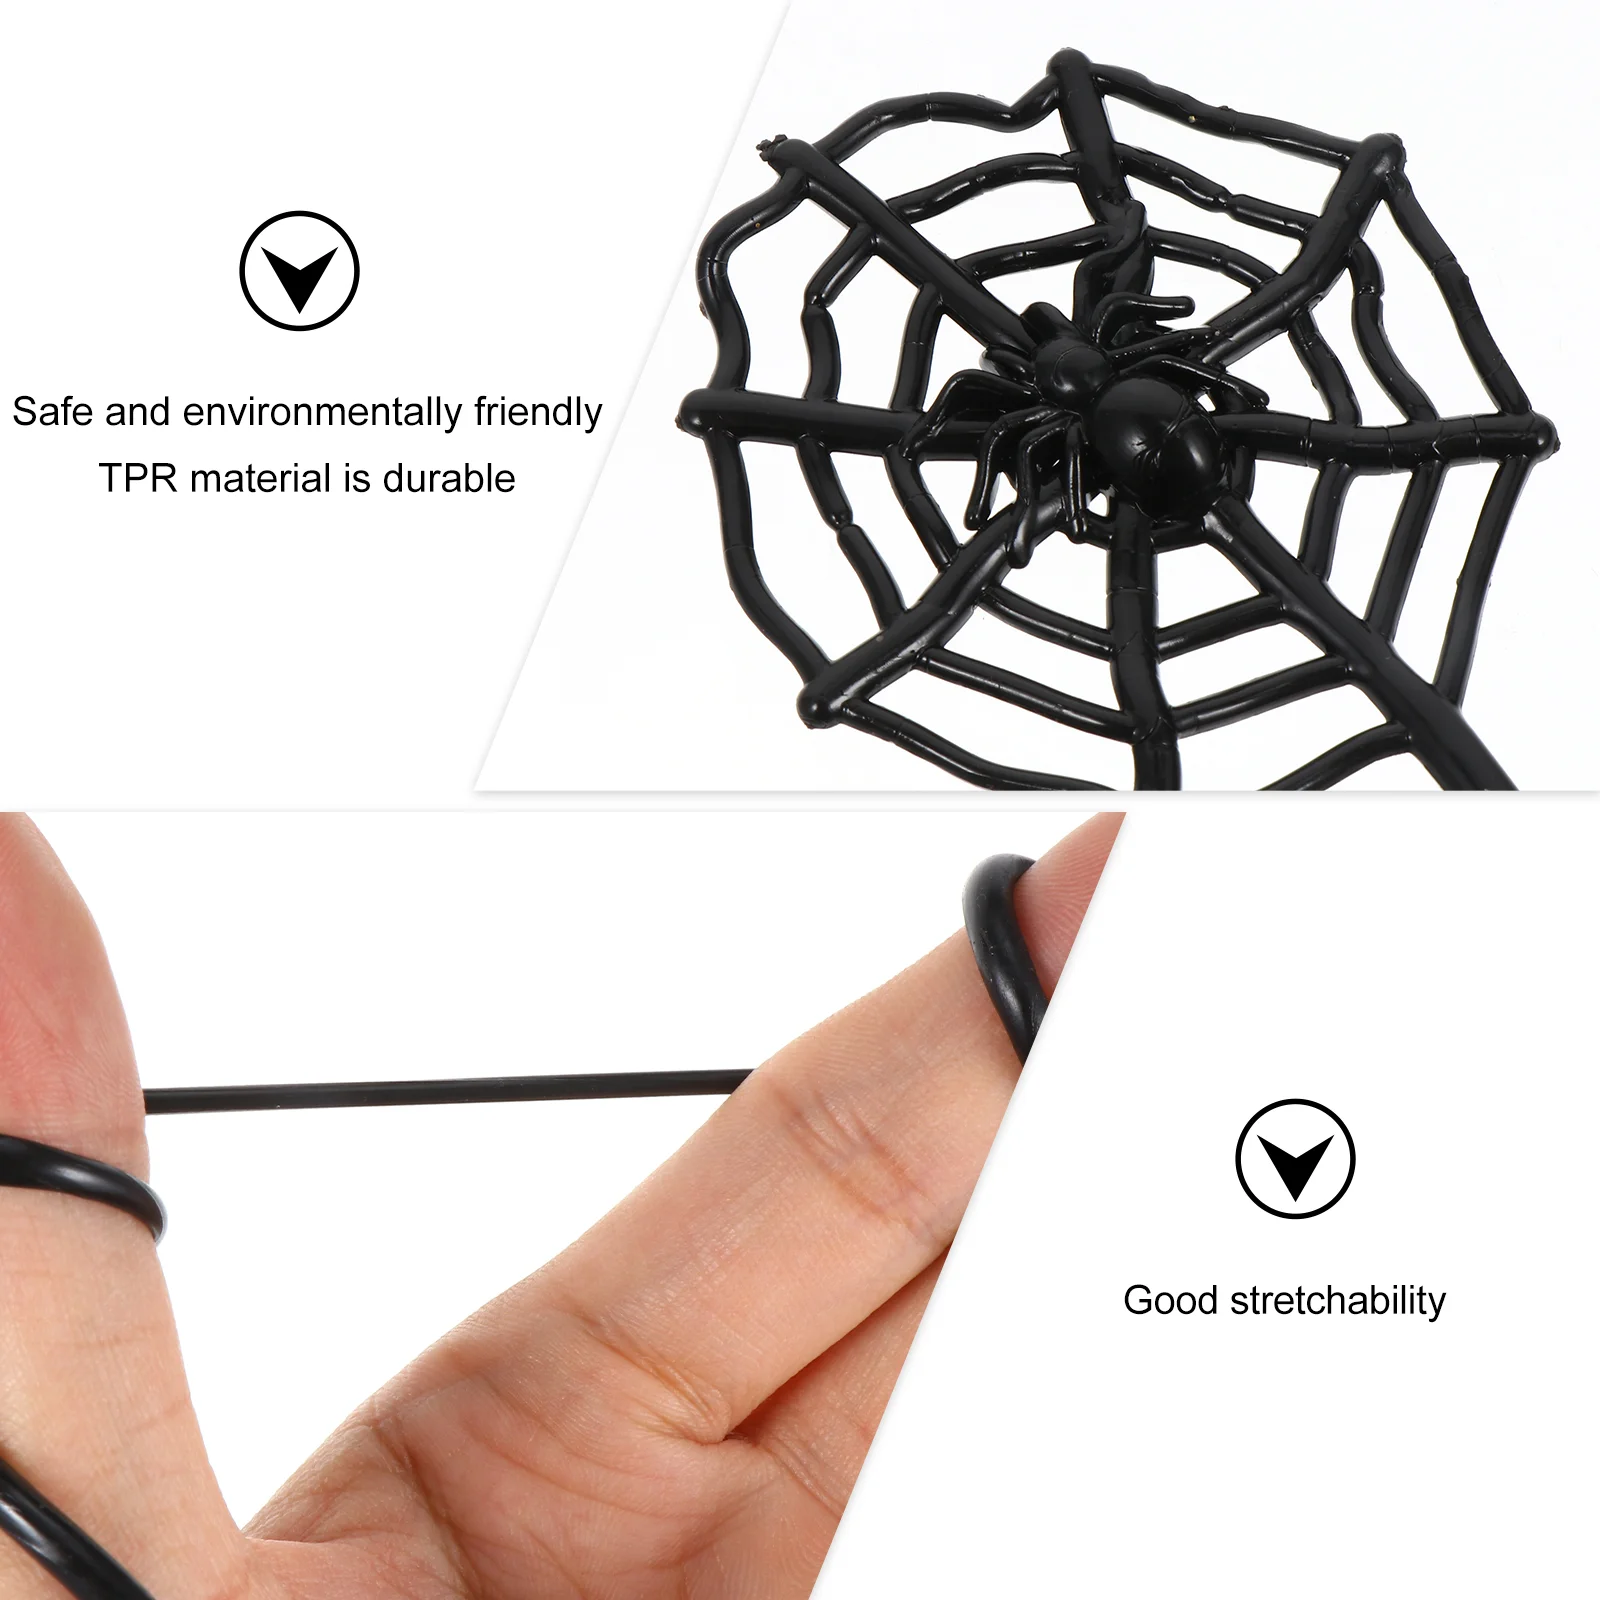 

20 Pcs Viscous Spider Web Supple Sticky Playthings Children Halloween Toys The Gift Telescopic Themed Tpr Webs Anti-stress